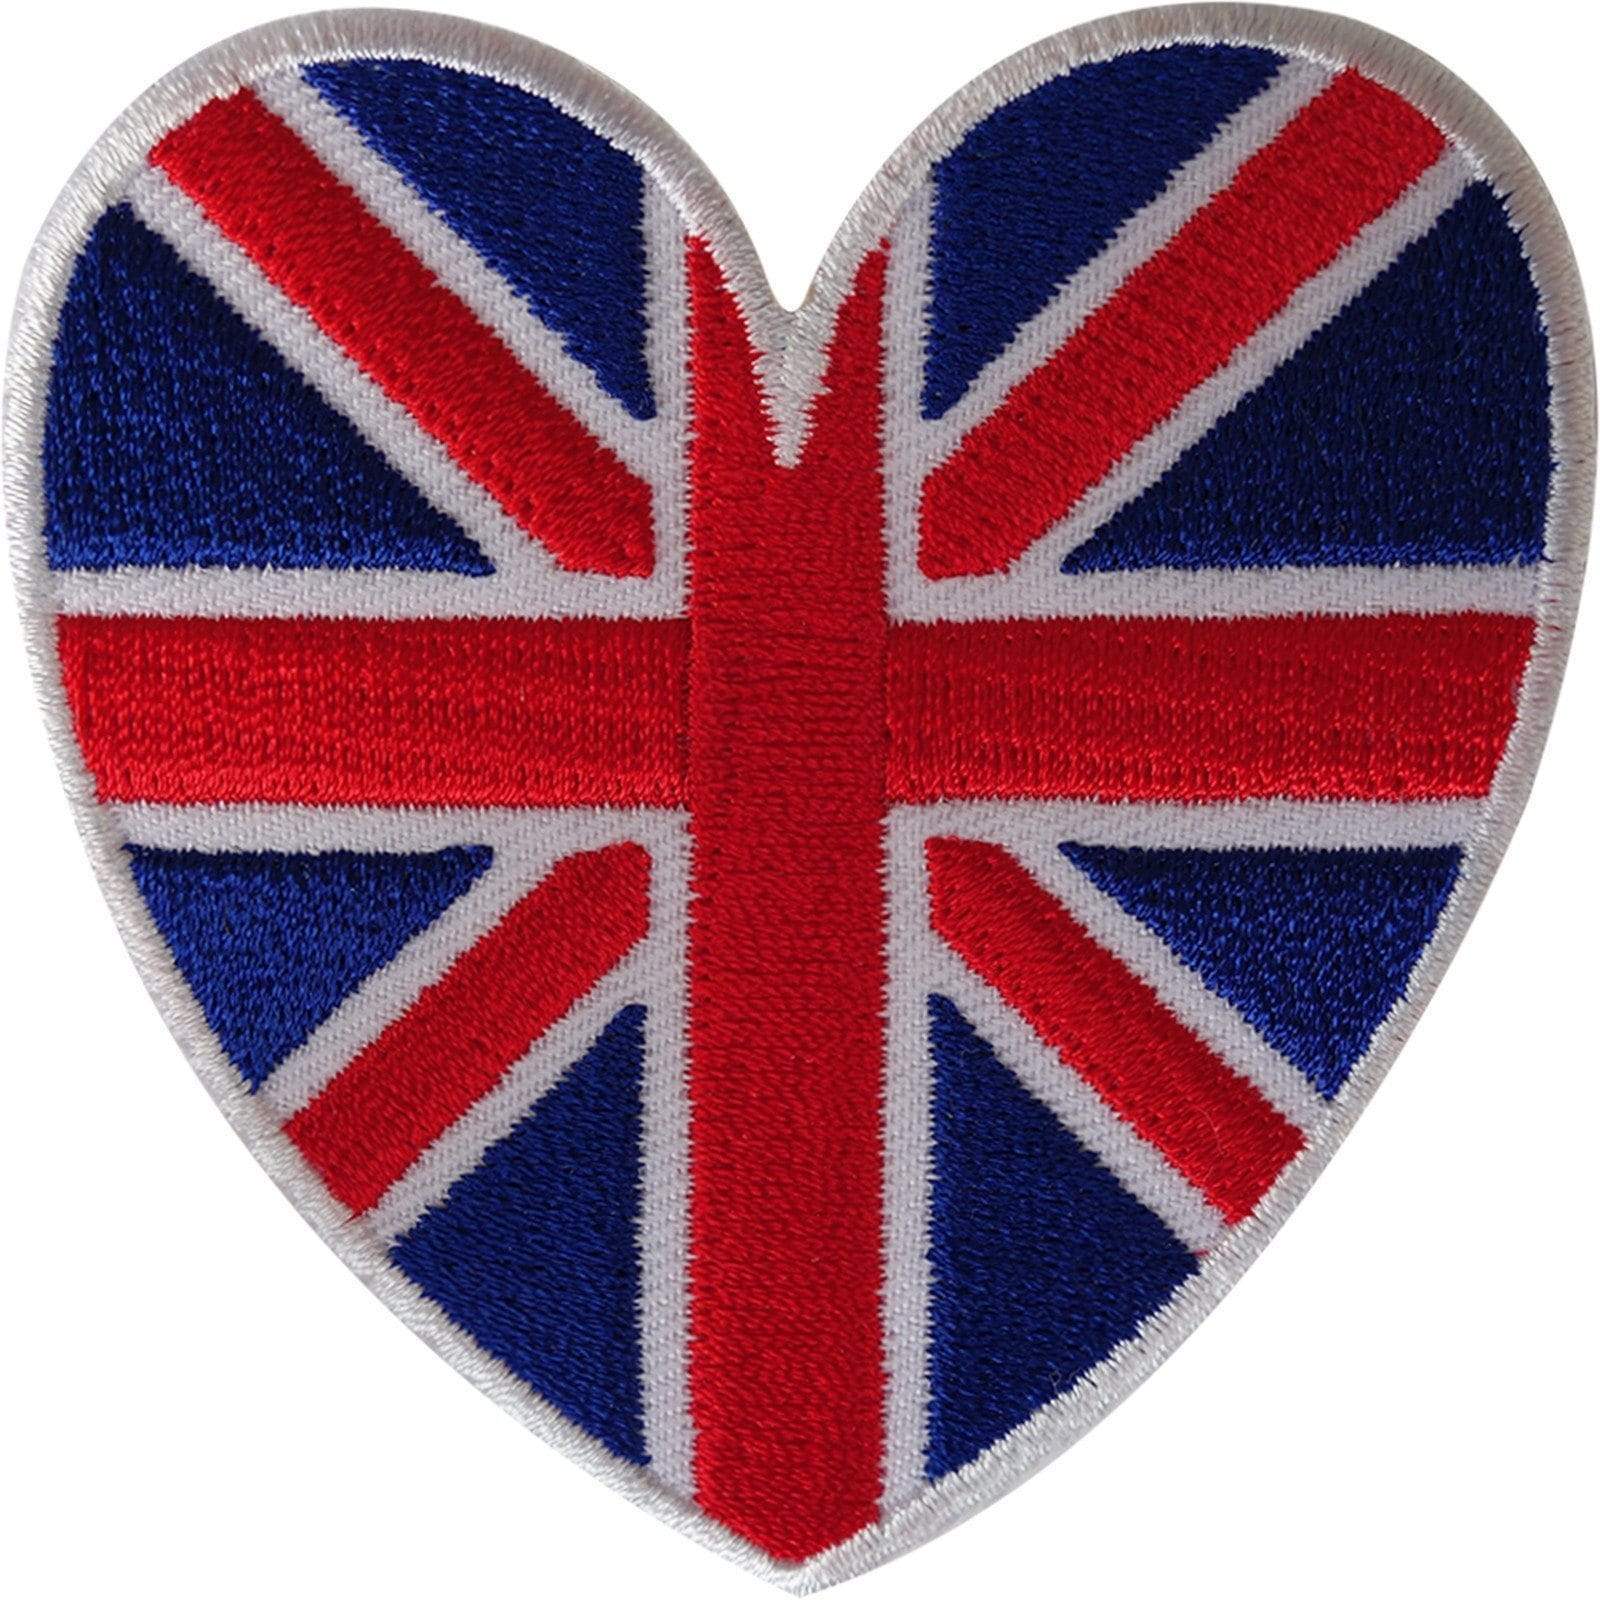 UK Flag Heart Patch Embroidered Iron Sew On Union Jack British Badge Applique